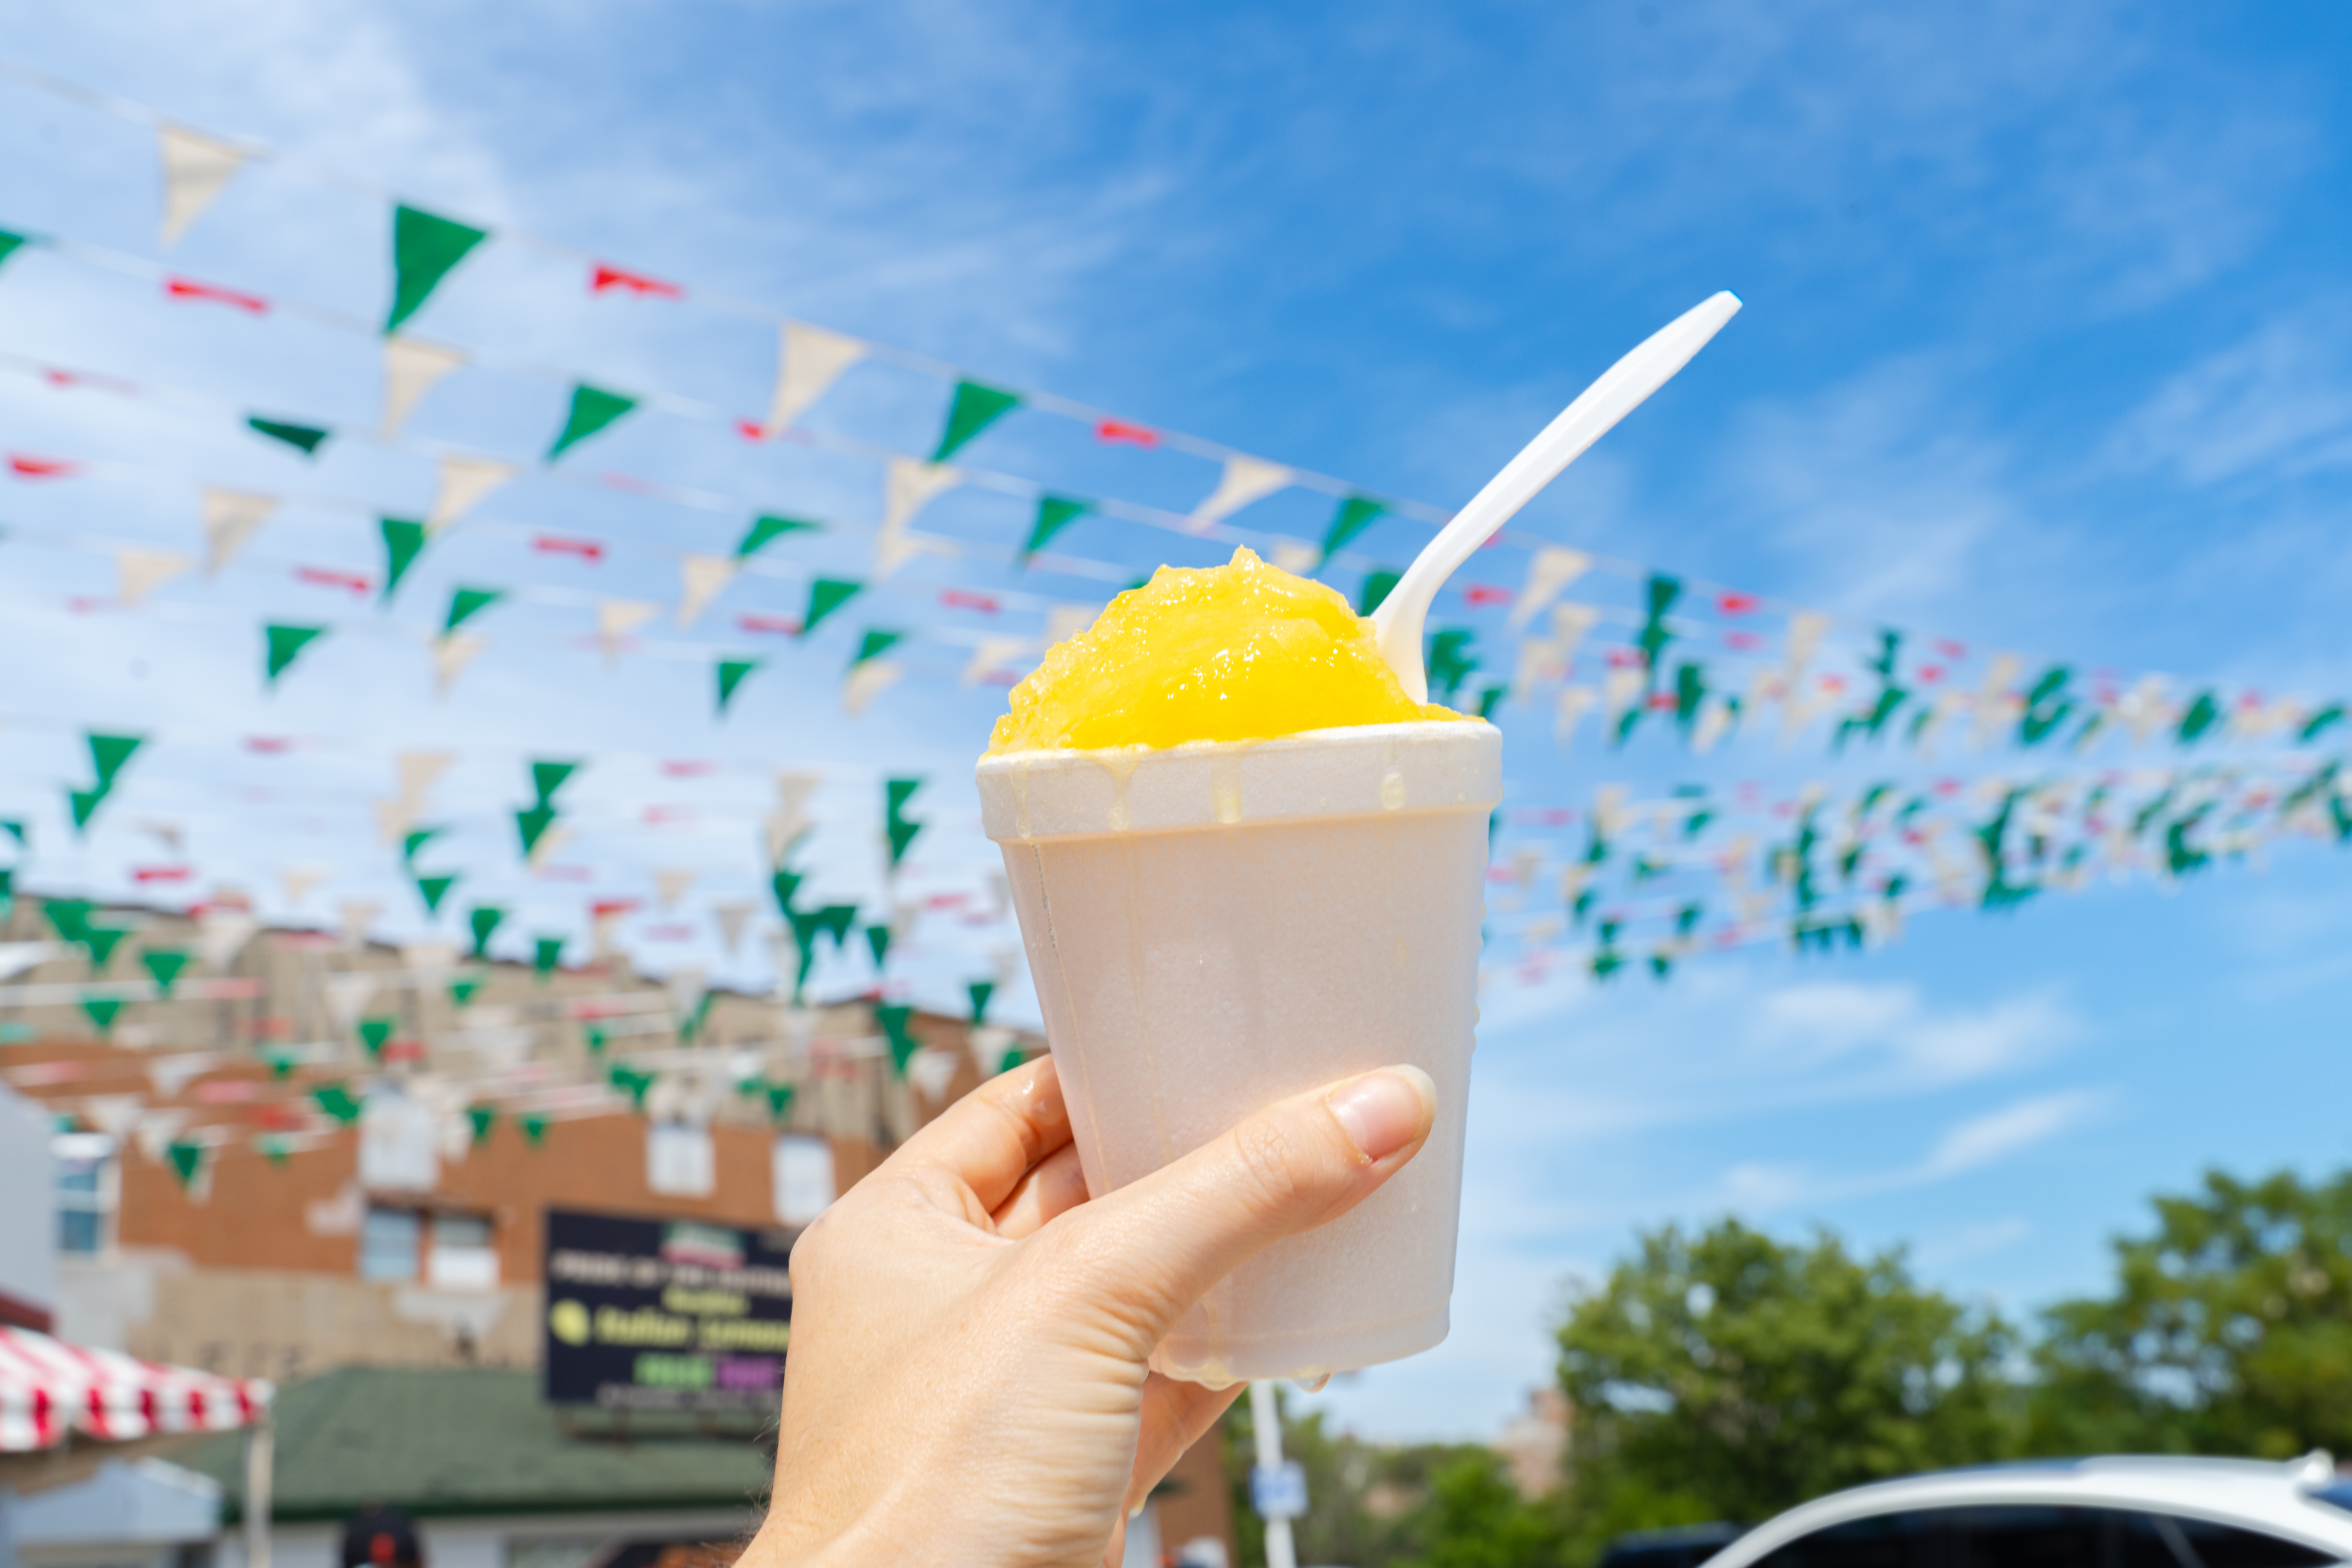 A hand holds up a white styrofoam cup filled with yellow Italian ice in front of a blue sky with white clouds and strings of red, green, and white flags.